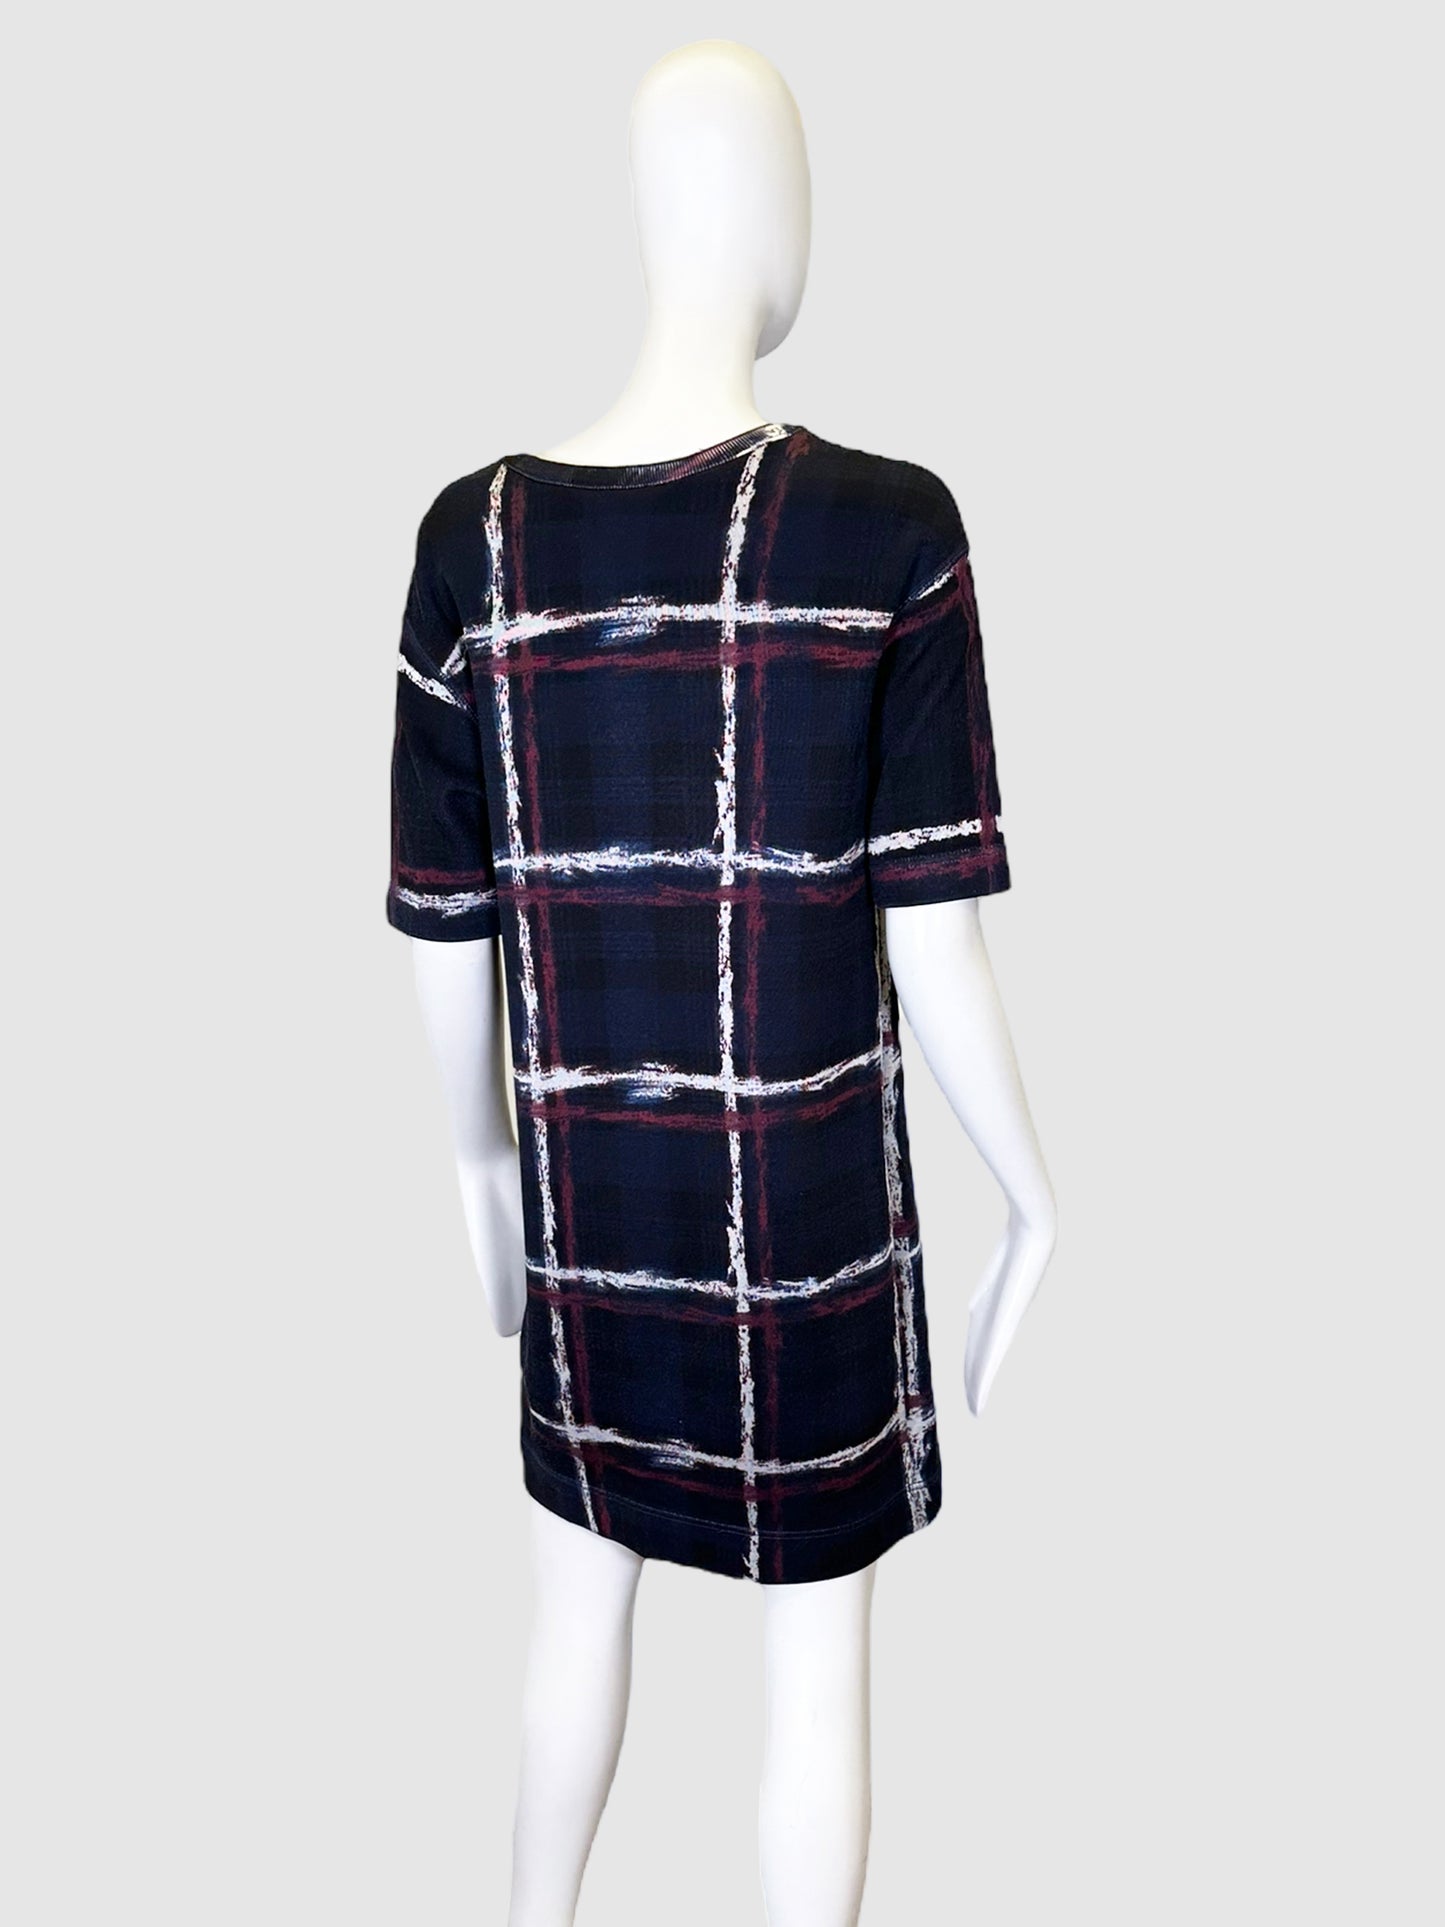 Marc by Marc Jacobs Plaid Short-Sleeved Dress - Size S